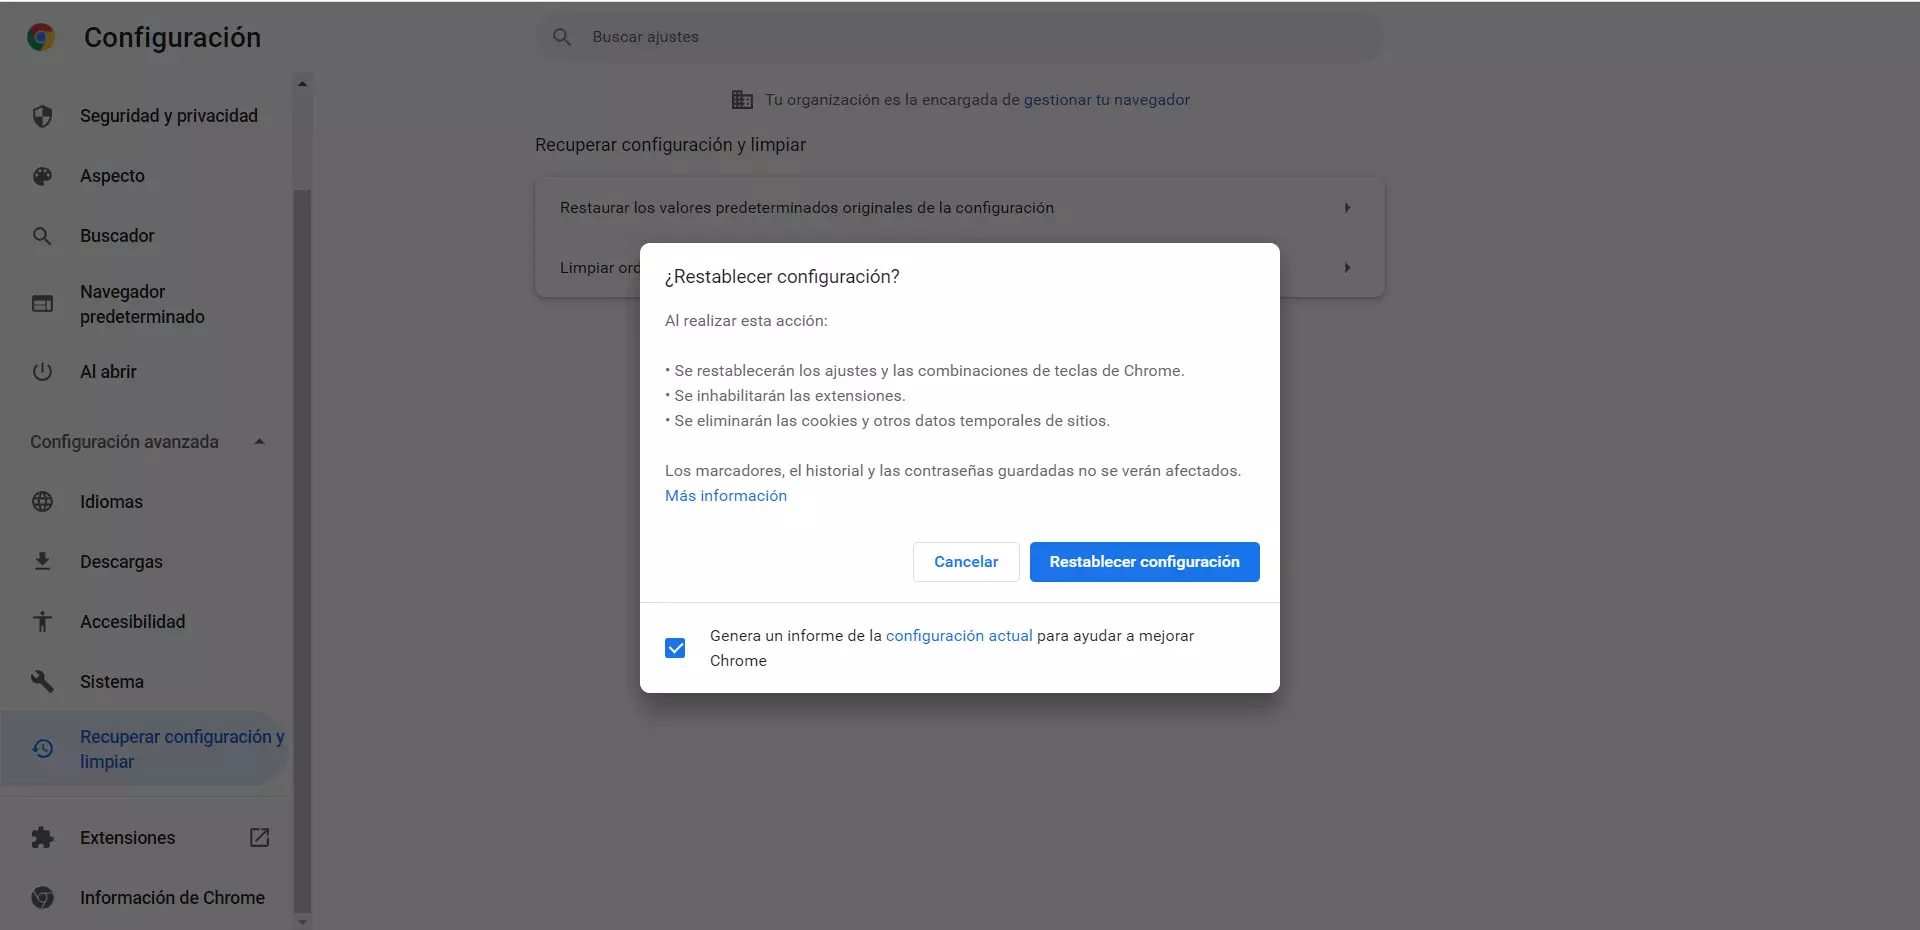 Restore Defaults in Chrome